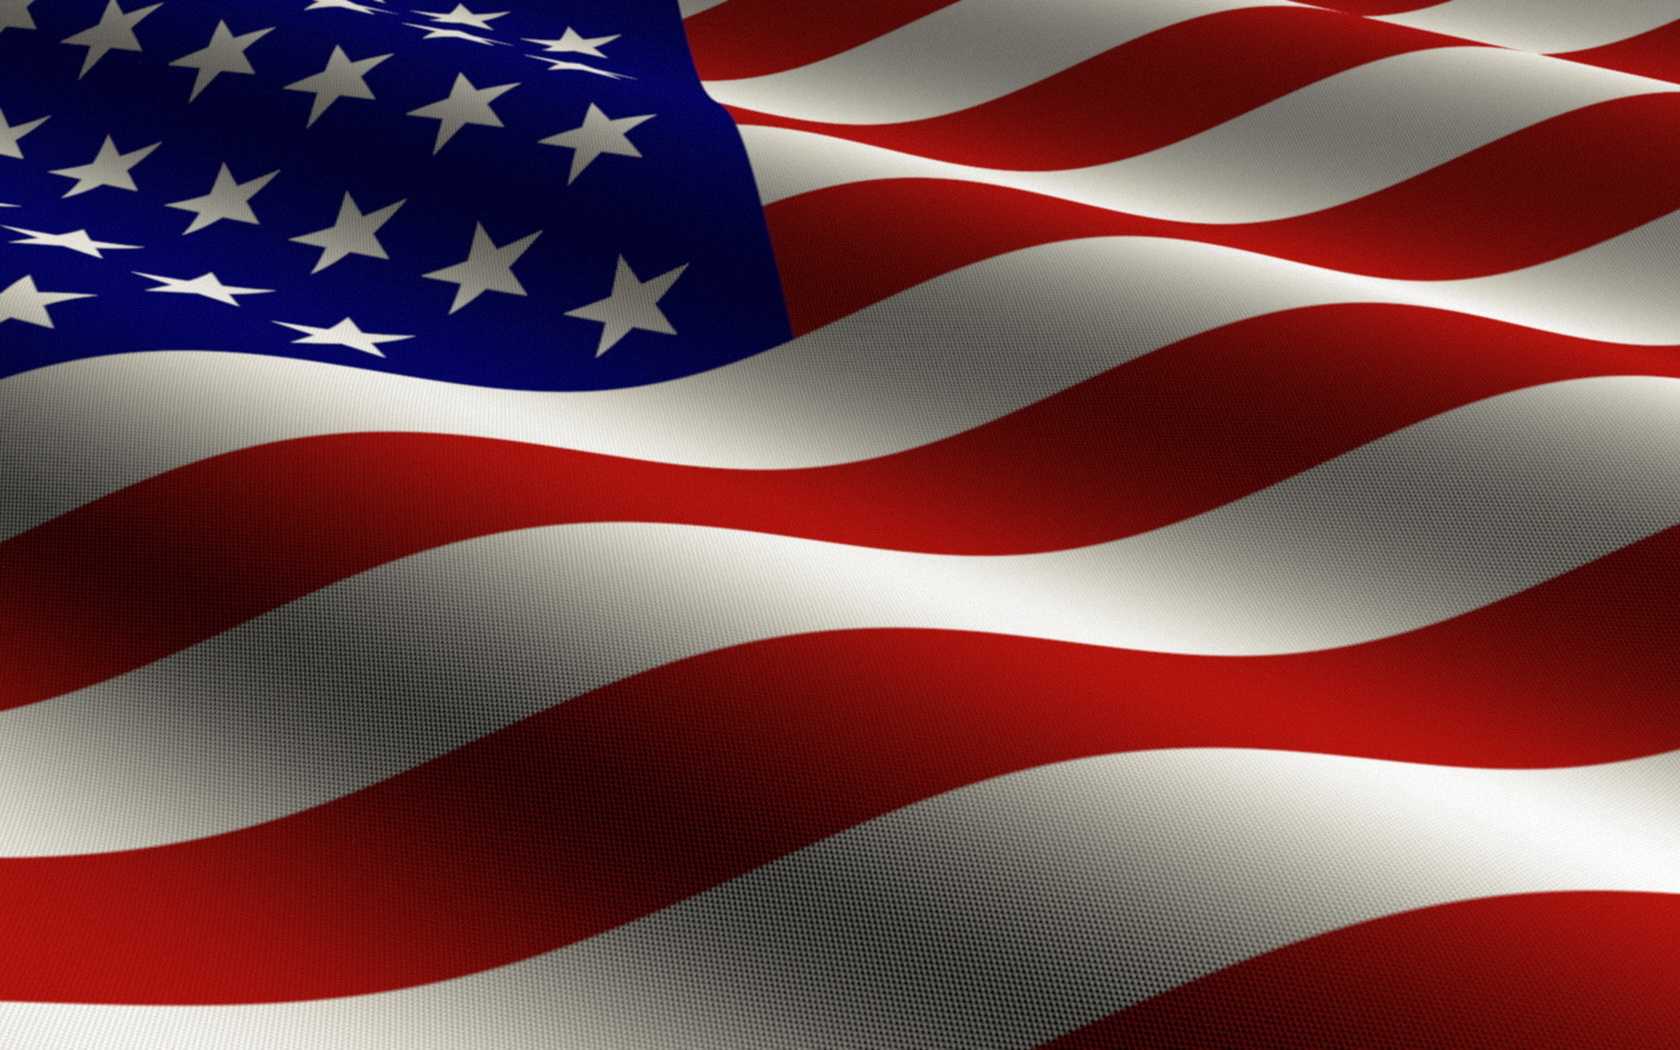 American Flag Backgrounds For Powerpoint Templates - Ppt Intended For American Flag Powerpoint Template